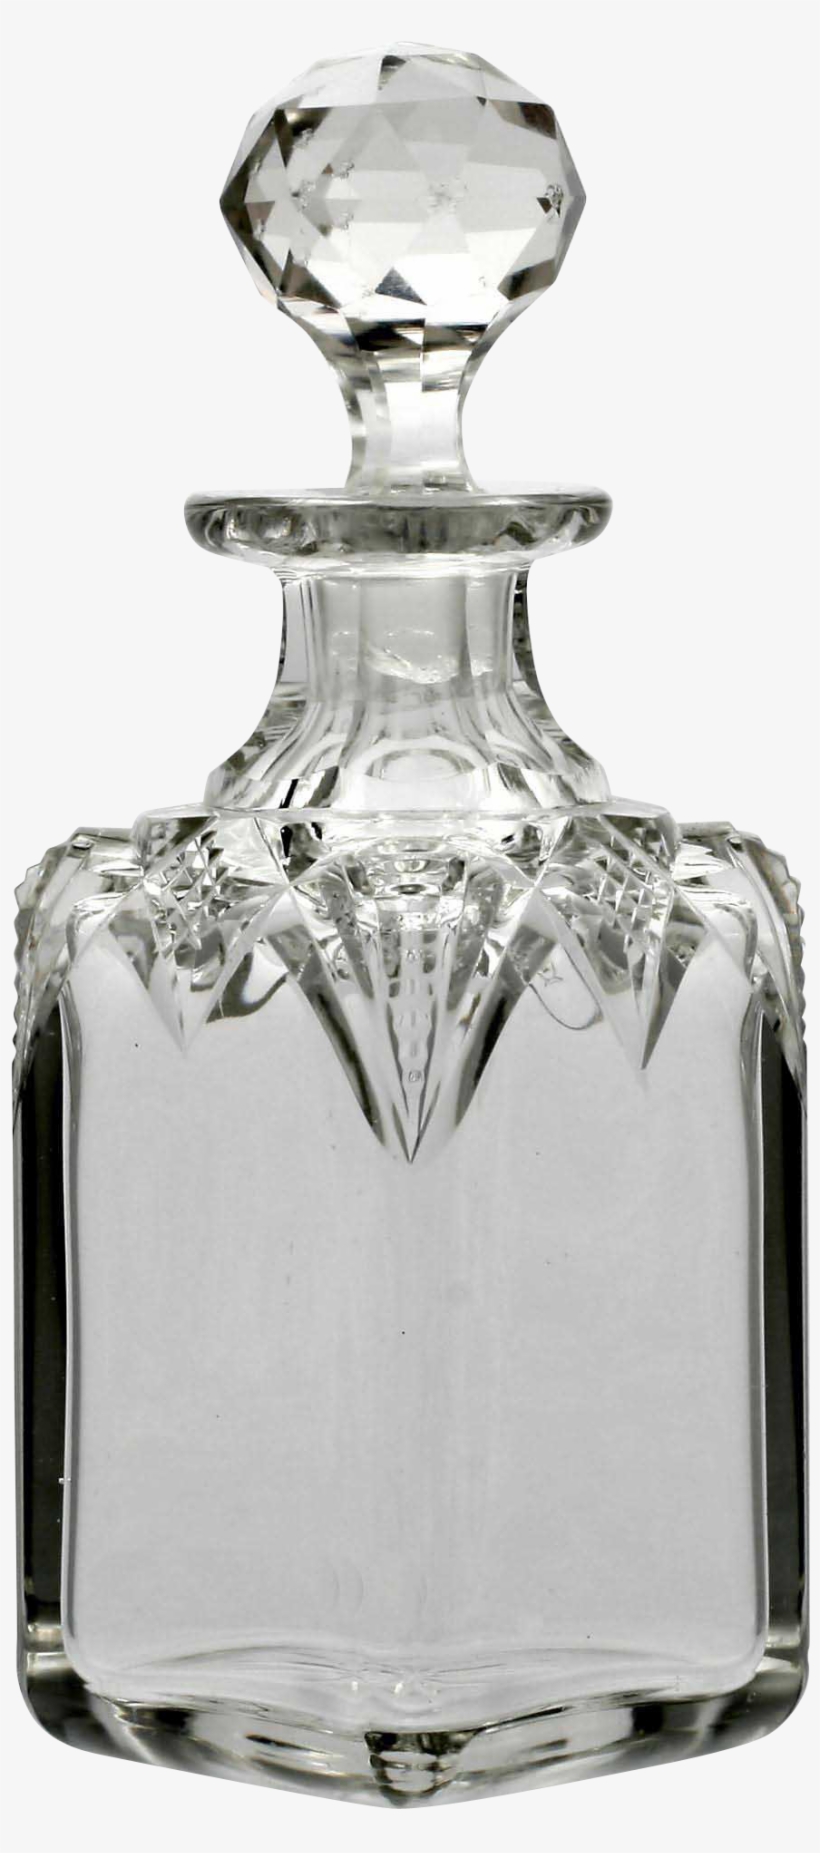 1950 X 1950 1 - Glass Perfume Bottle Png, transparent png #9021805